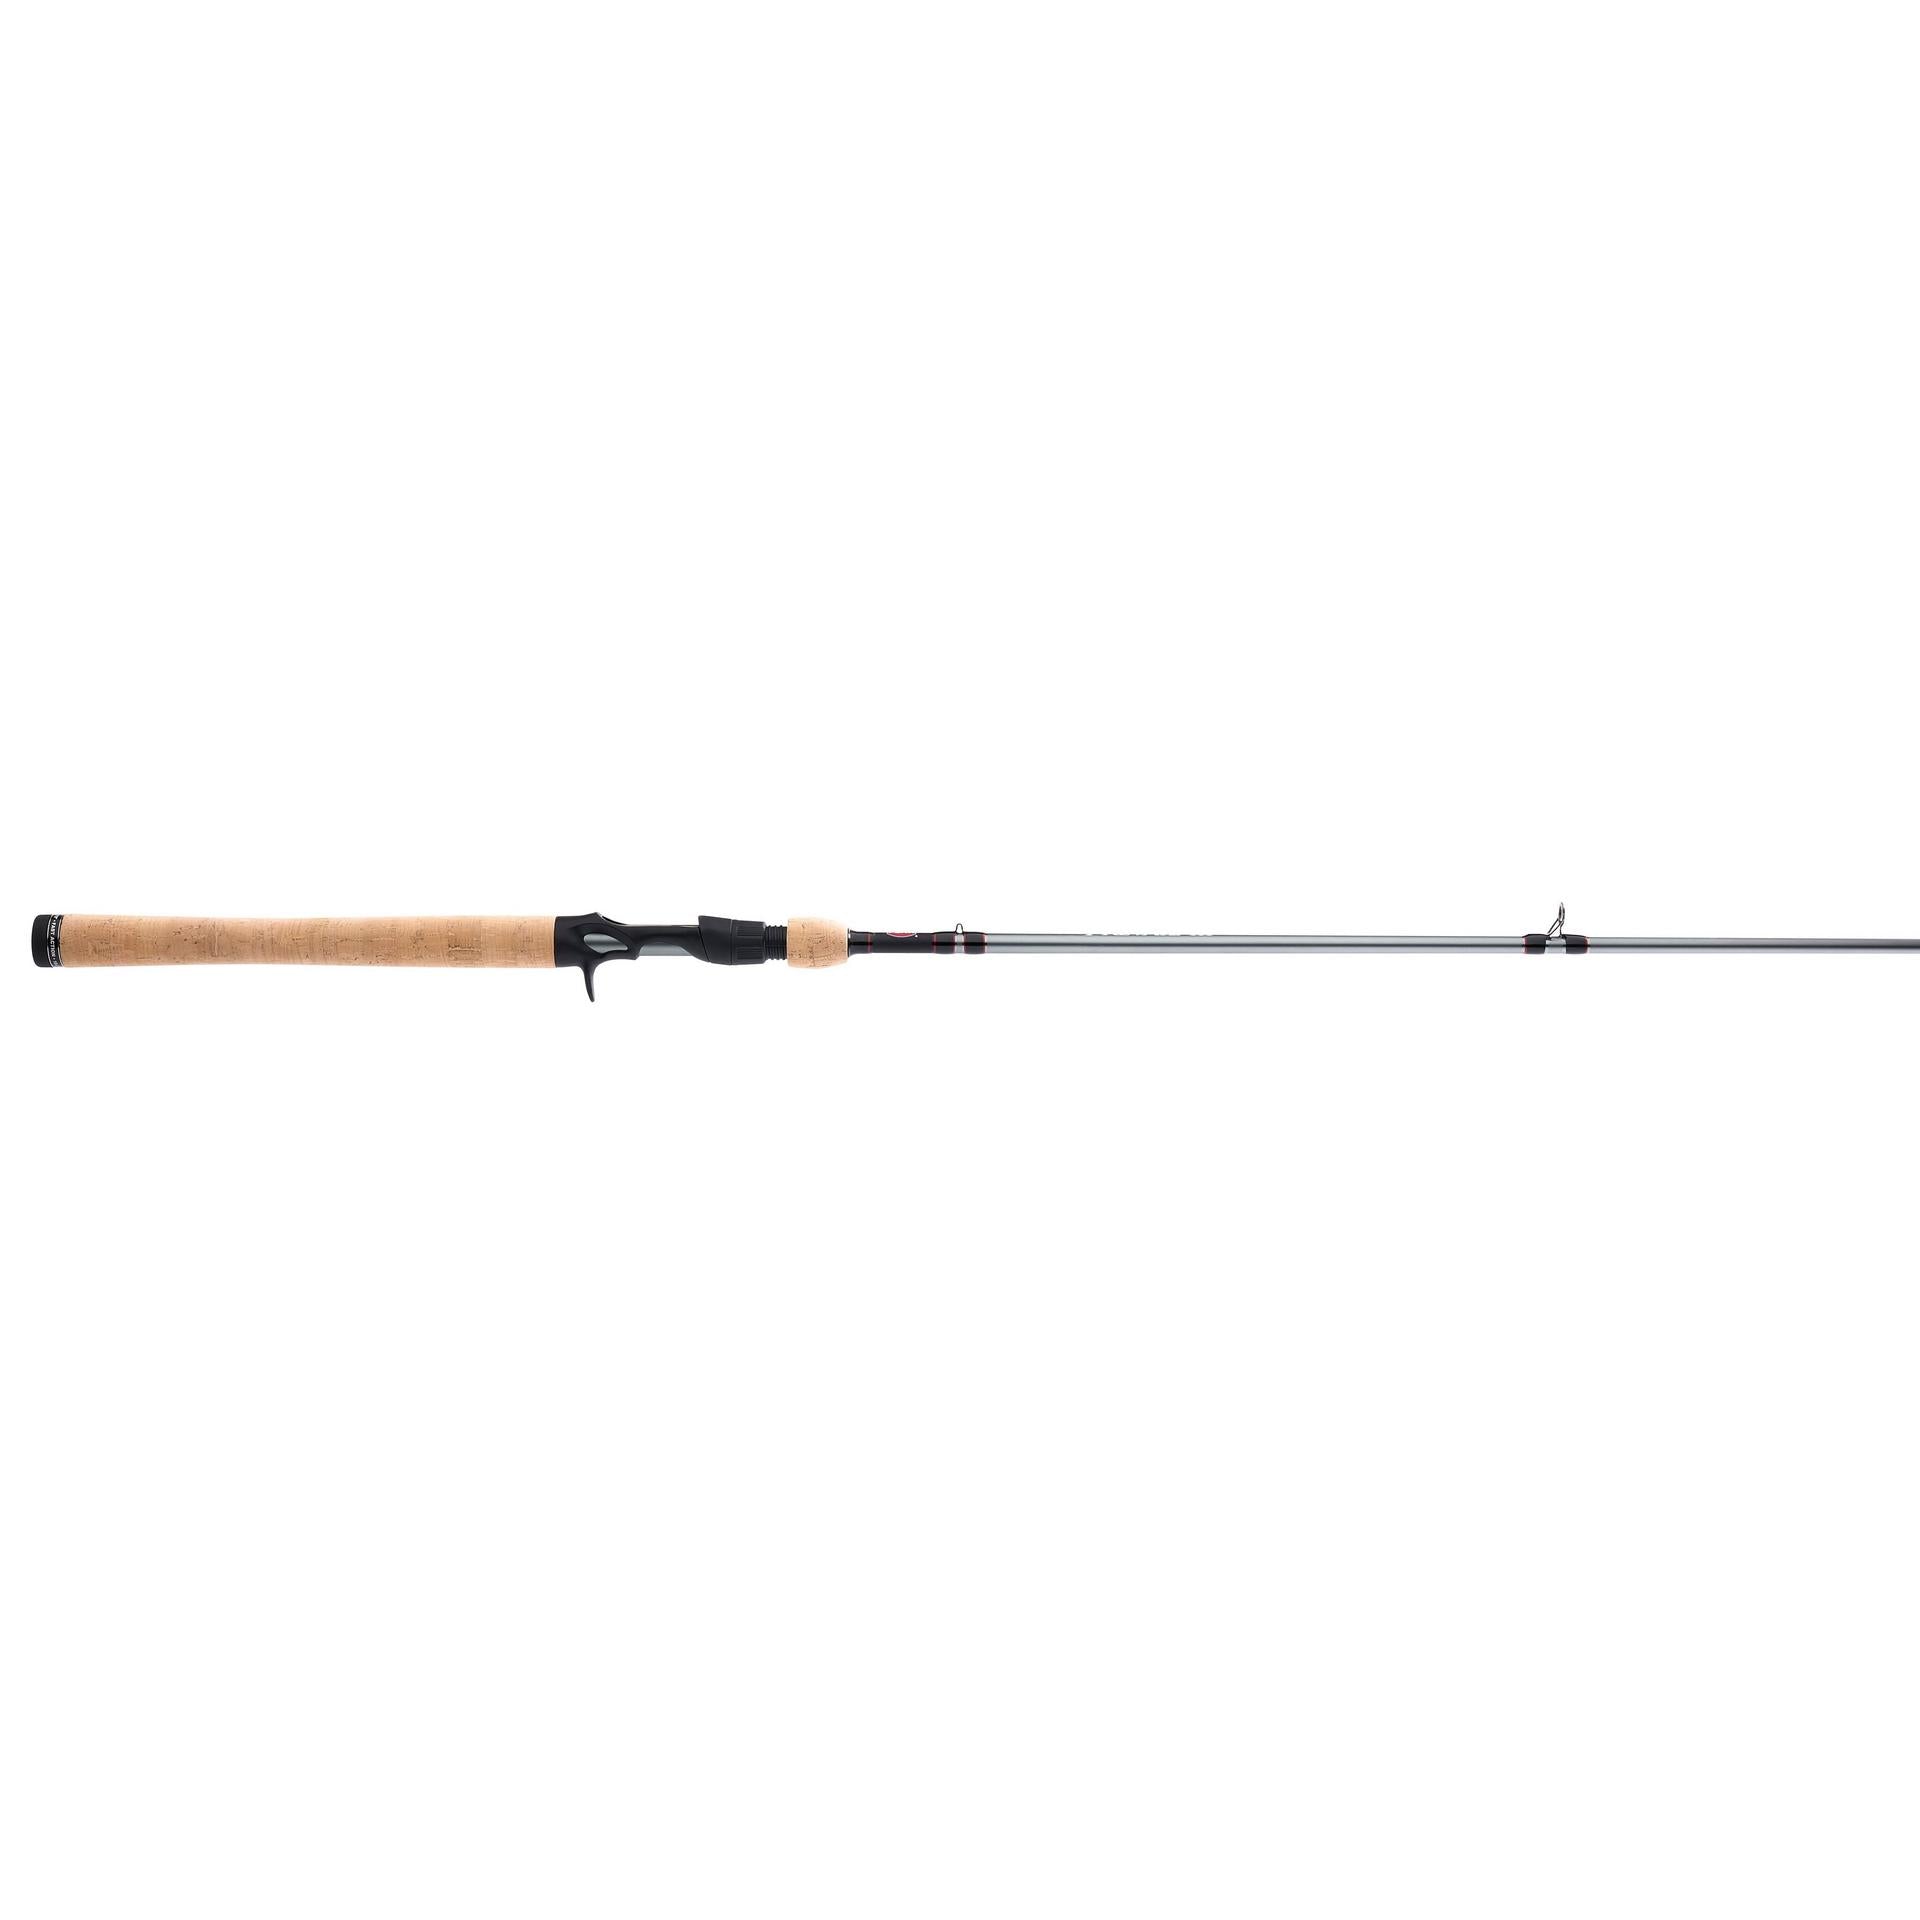 Prevail® III Inshore Casting Rod